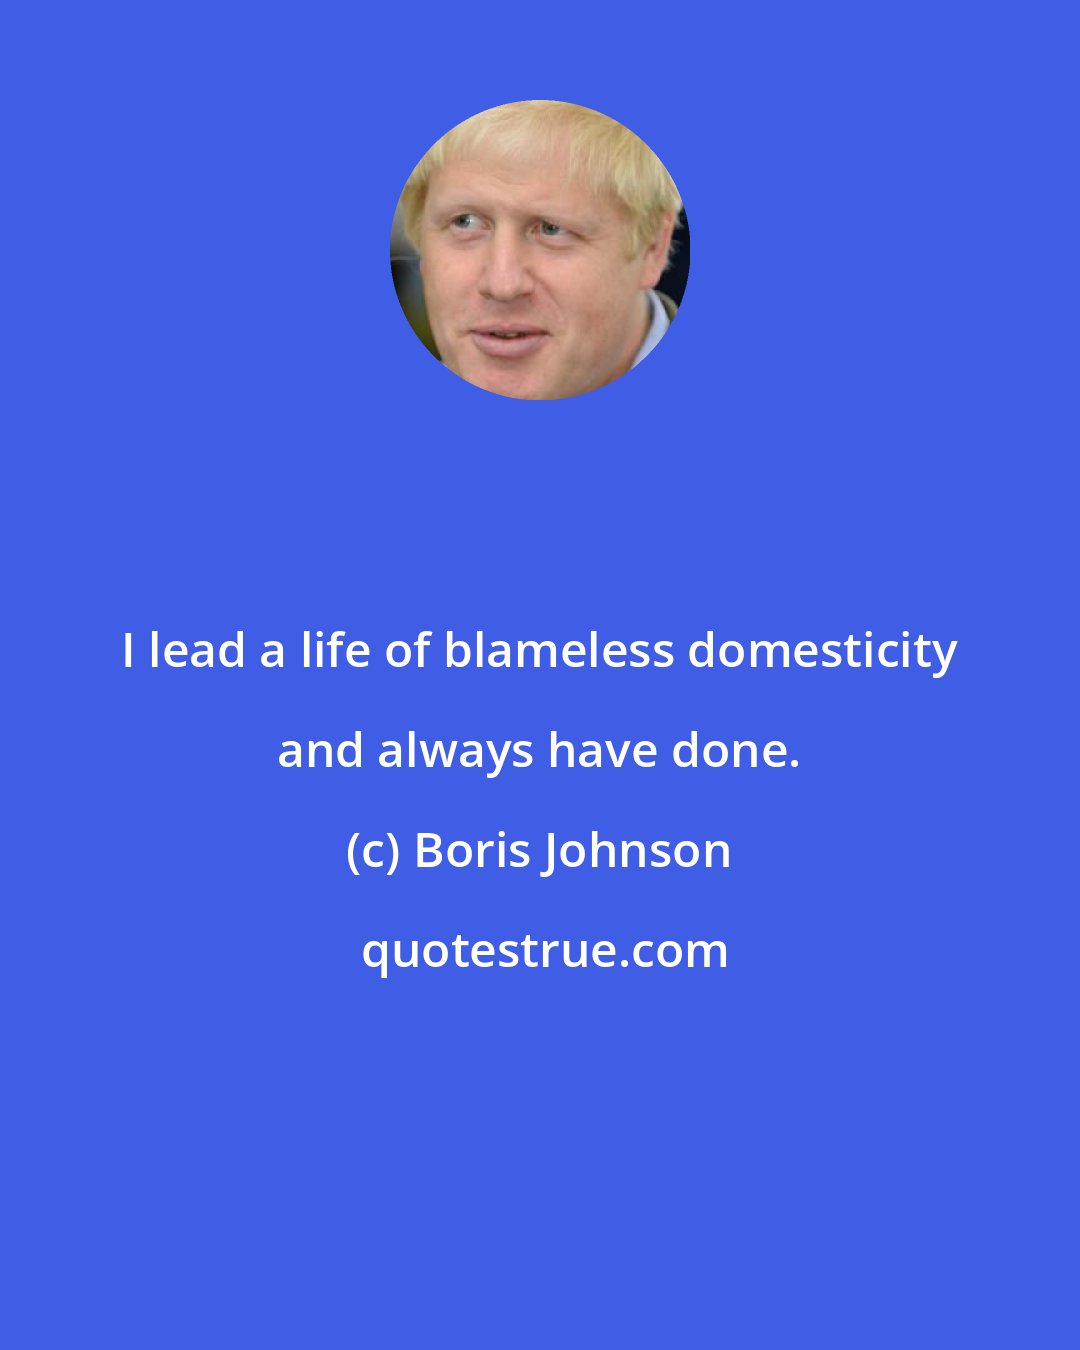 Boris Johnson: I lead a life of blameless domesticity and always have done.